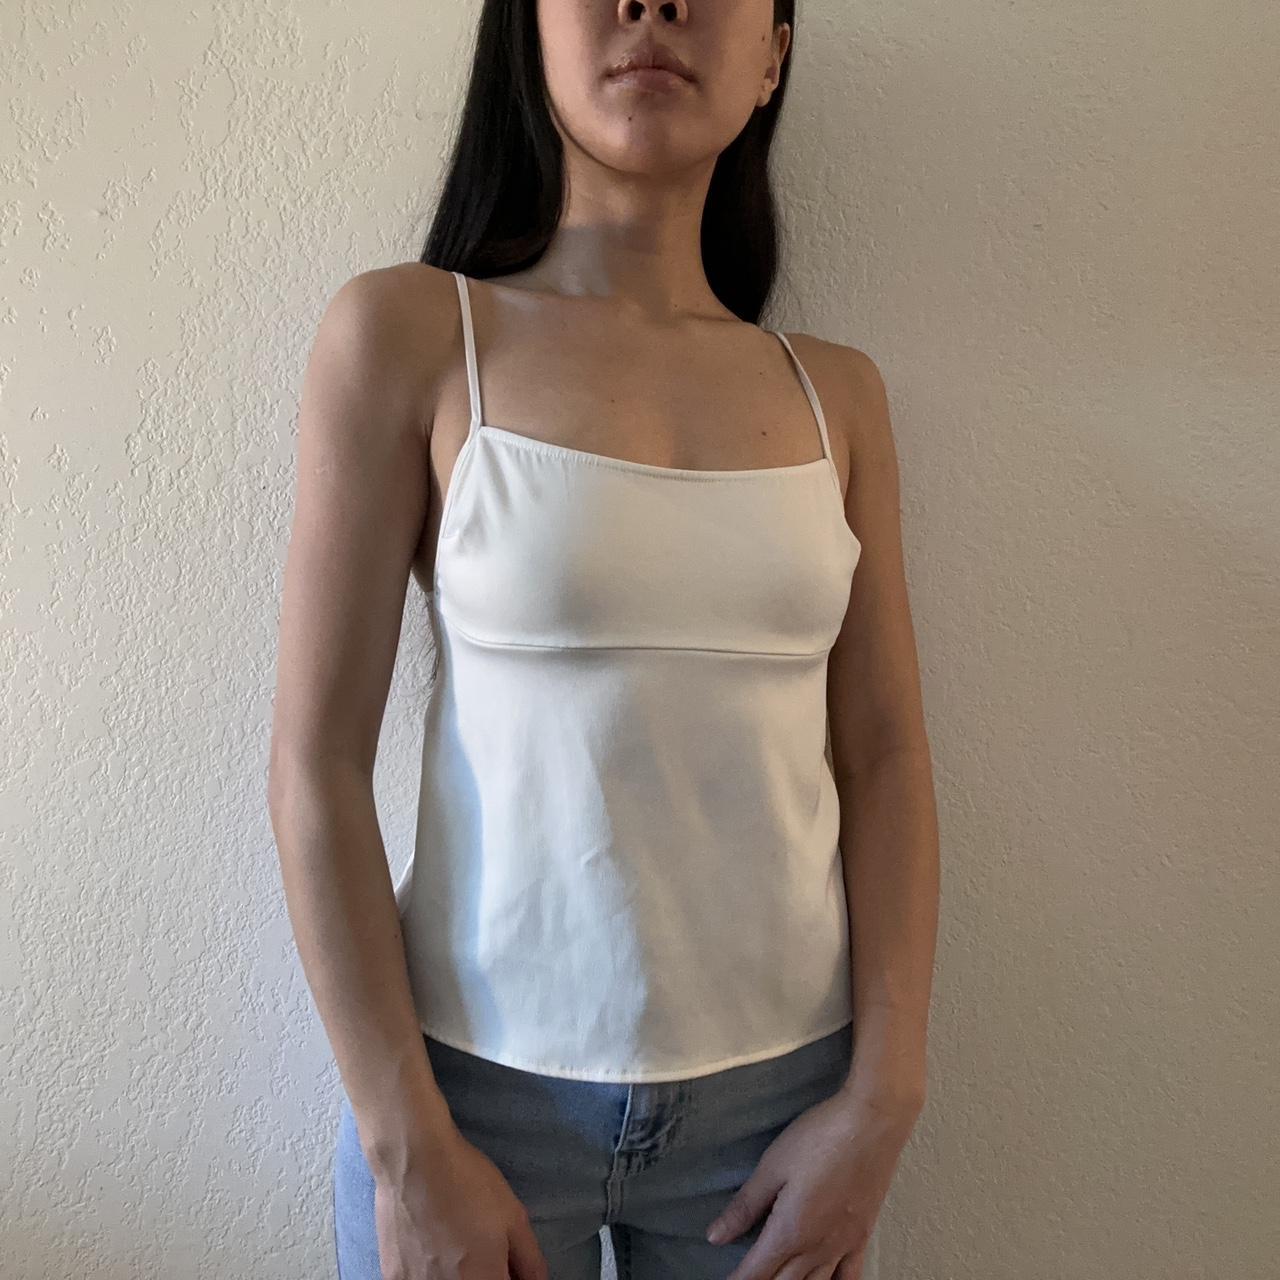 Urban Outfitters Women's White Vest